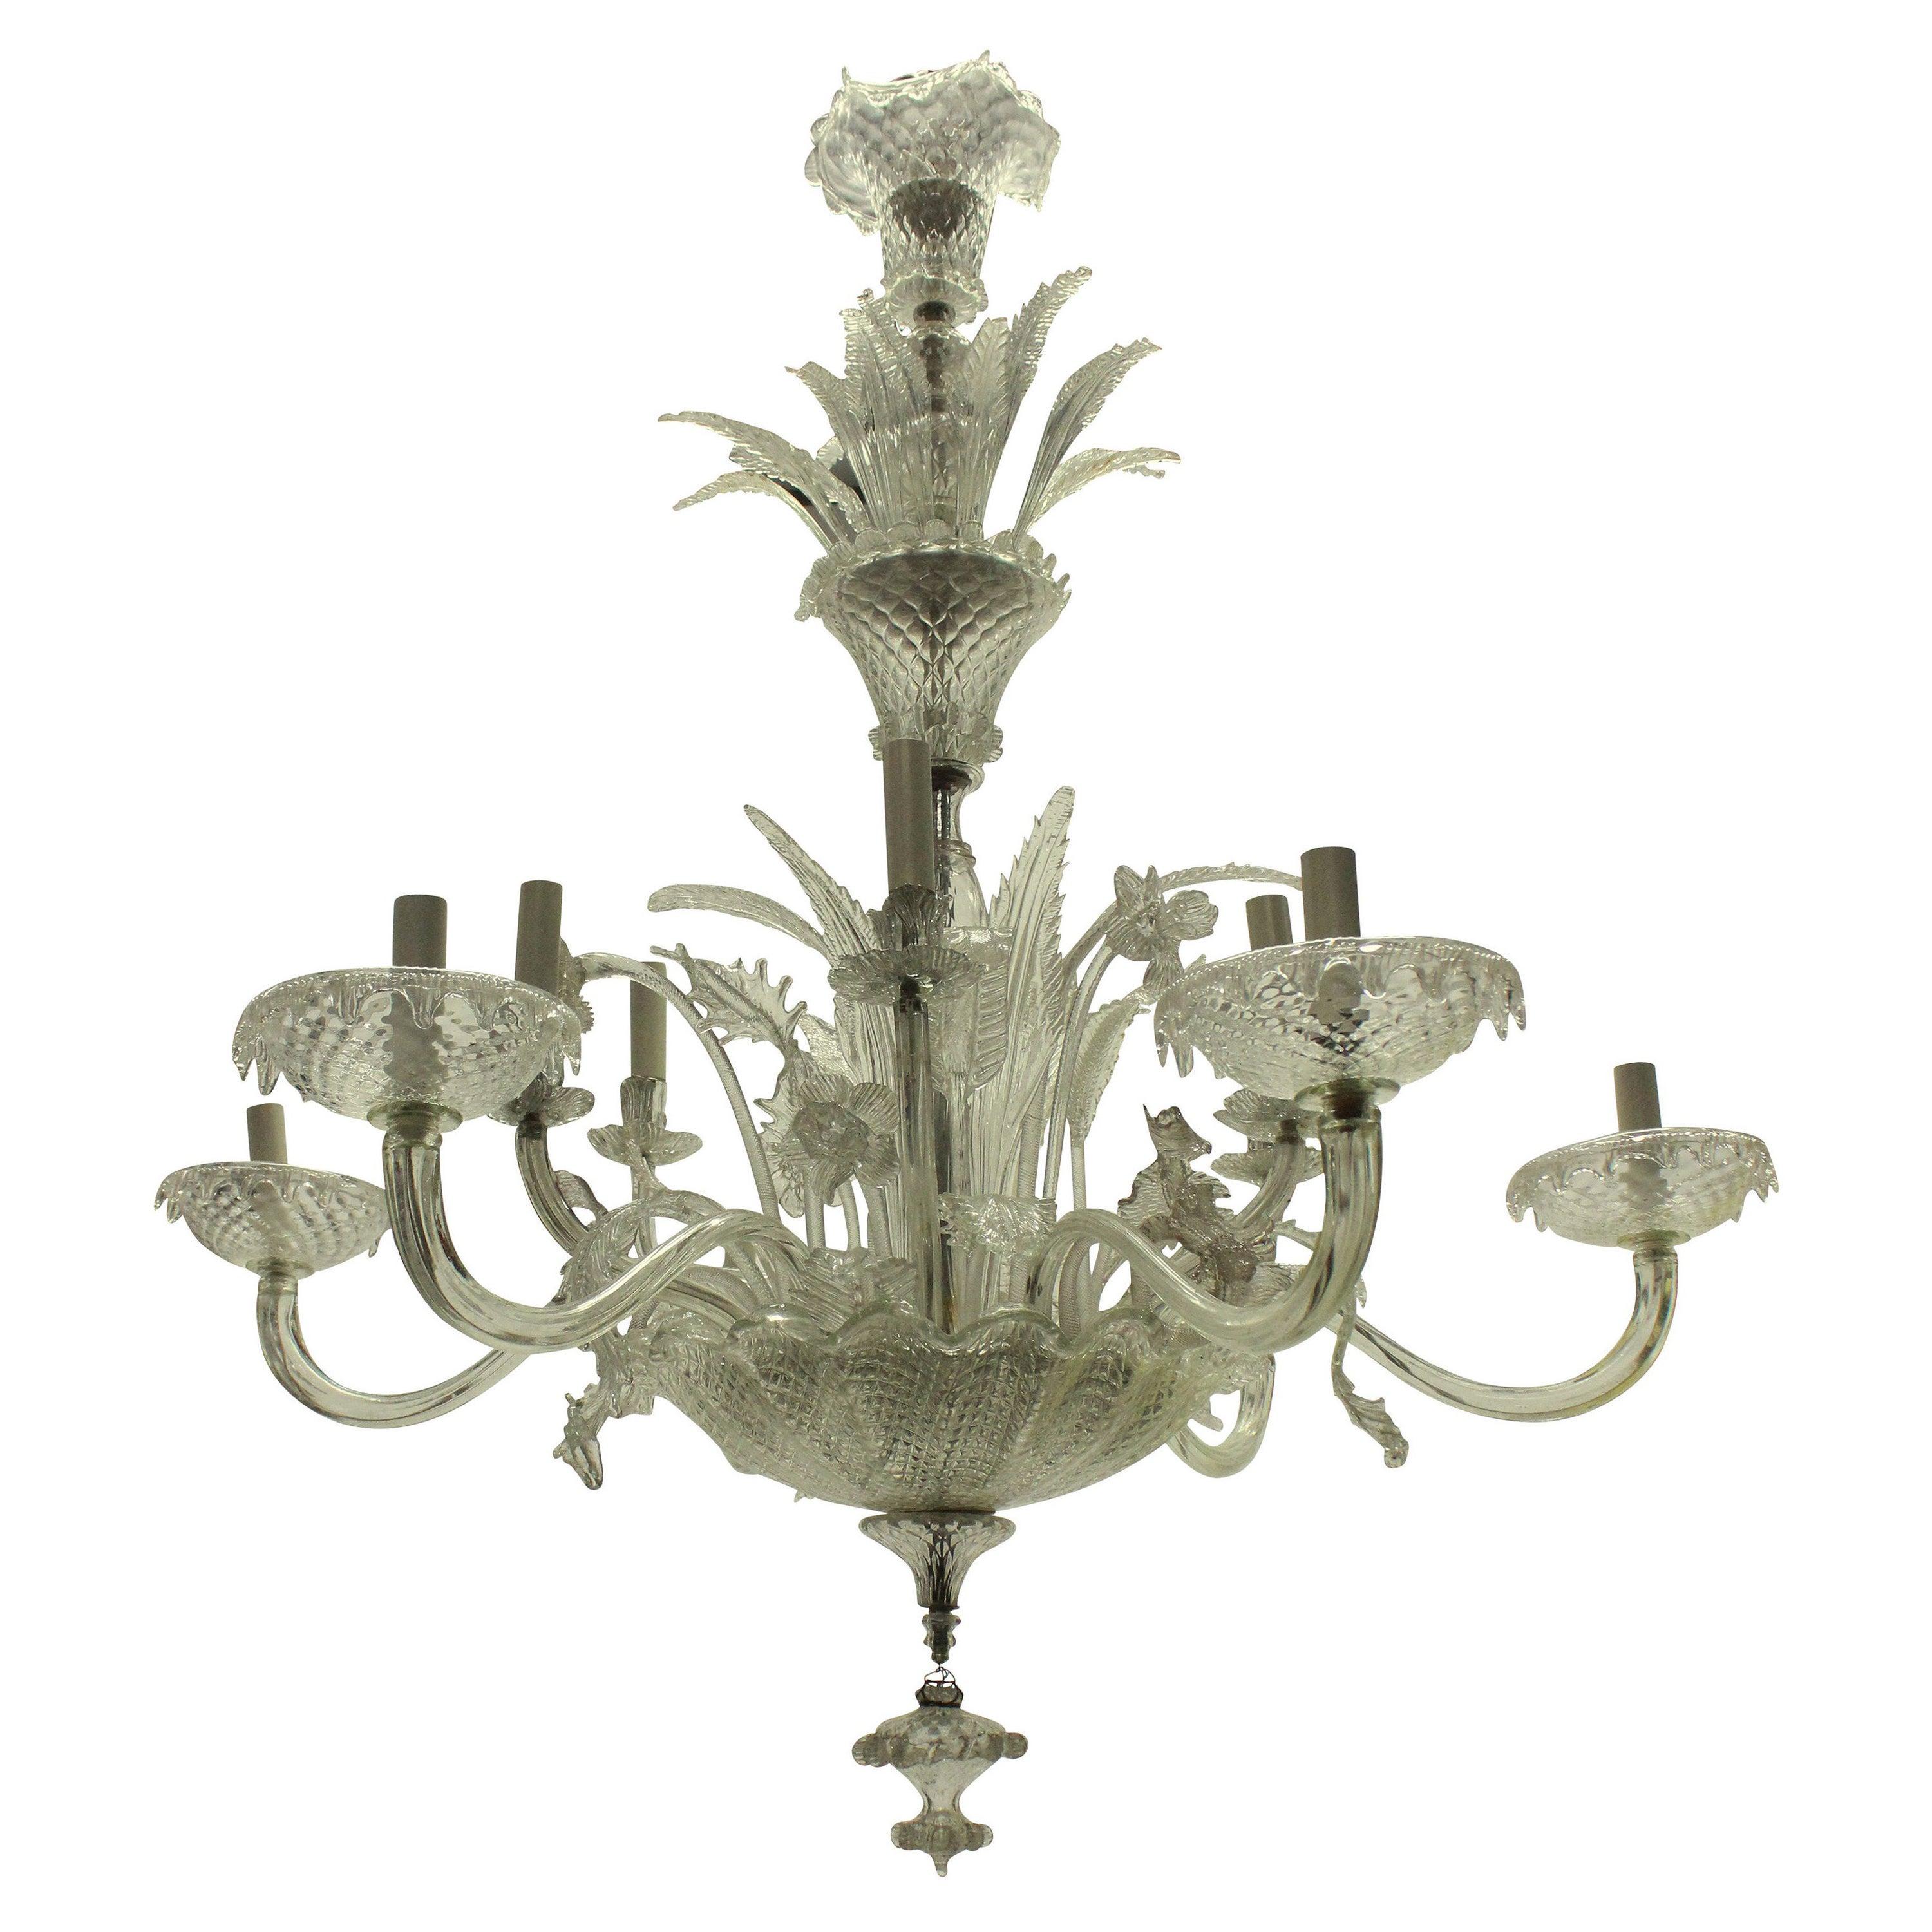 A large Italian murano glass chandelier of fine quality, with twelve arms, extending from a large patterned receiver dish with finial. The upper section profusely decorated with foliage and the central stem with a basket containing foliage and